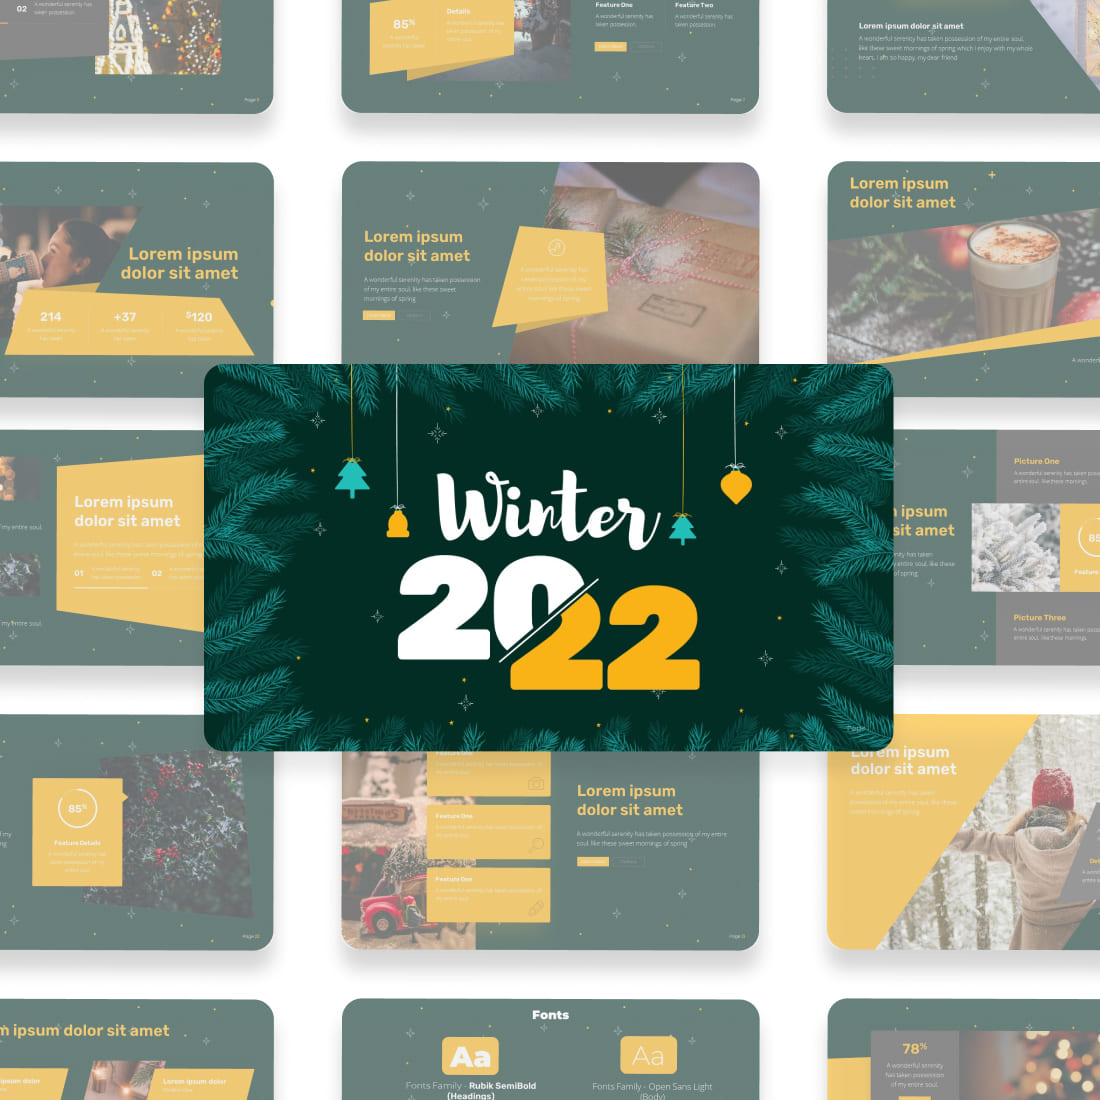 Winter Holidays Keynote Template cover.